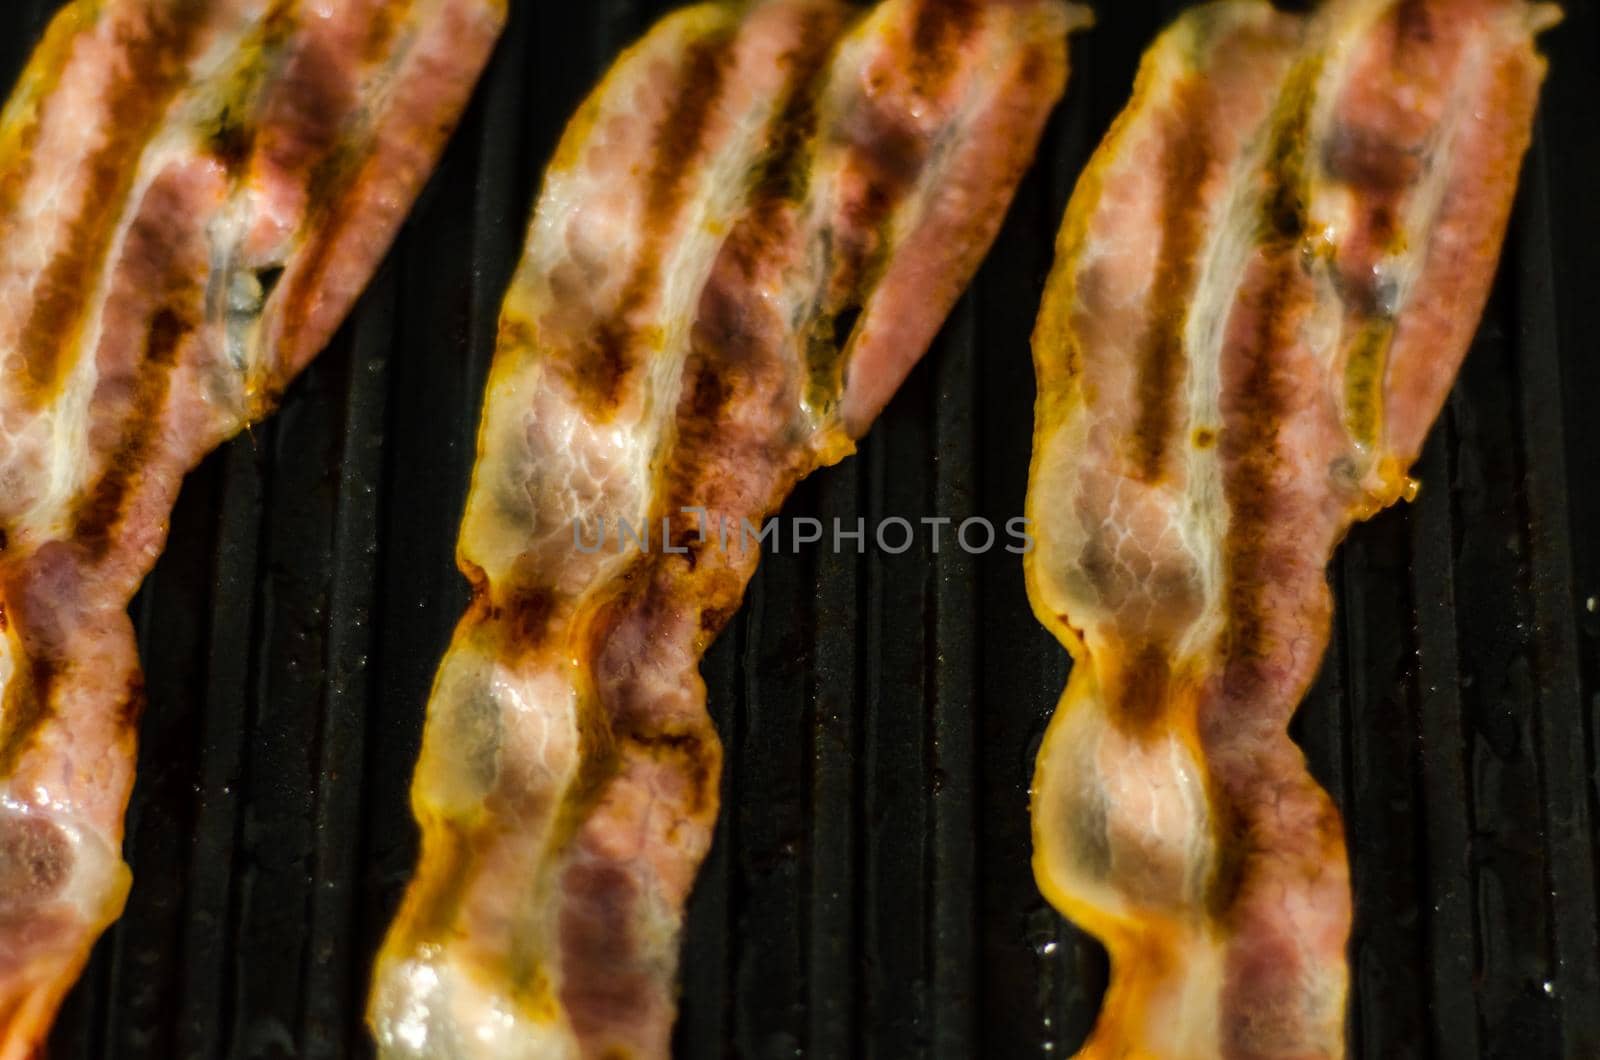 thin slices of delicious bacon fried on the grill, crispy and delicate meat by Q77photo